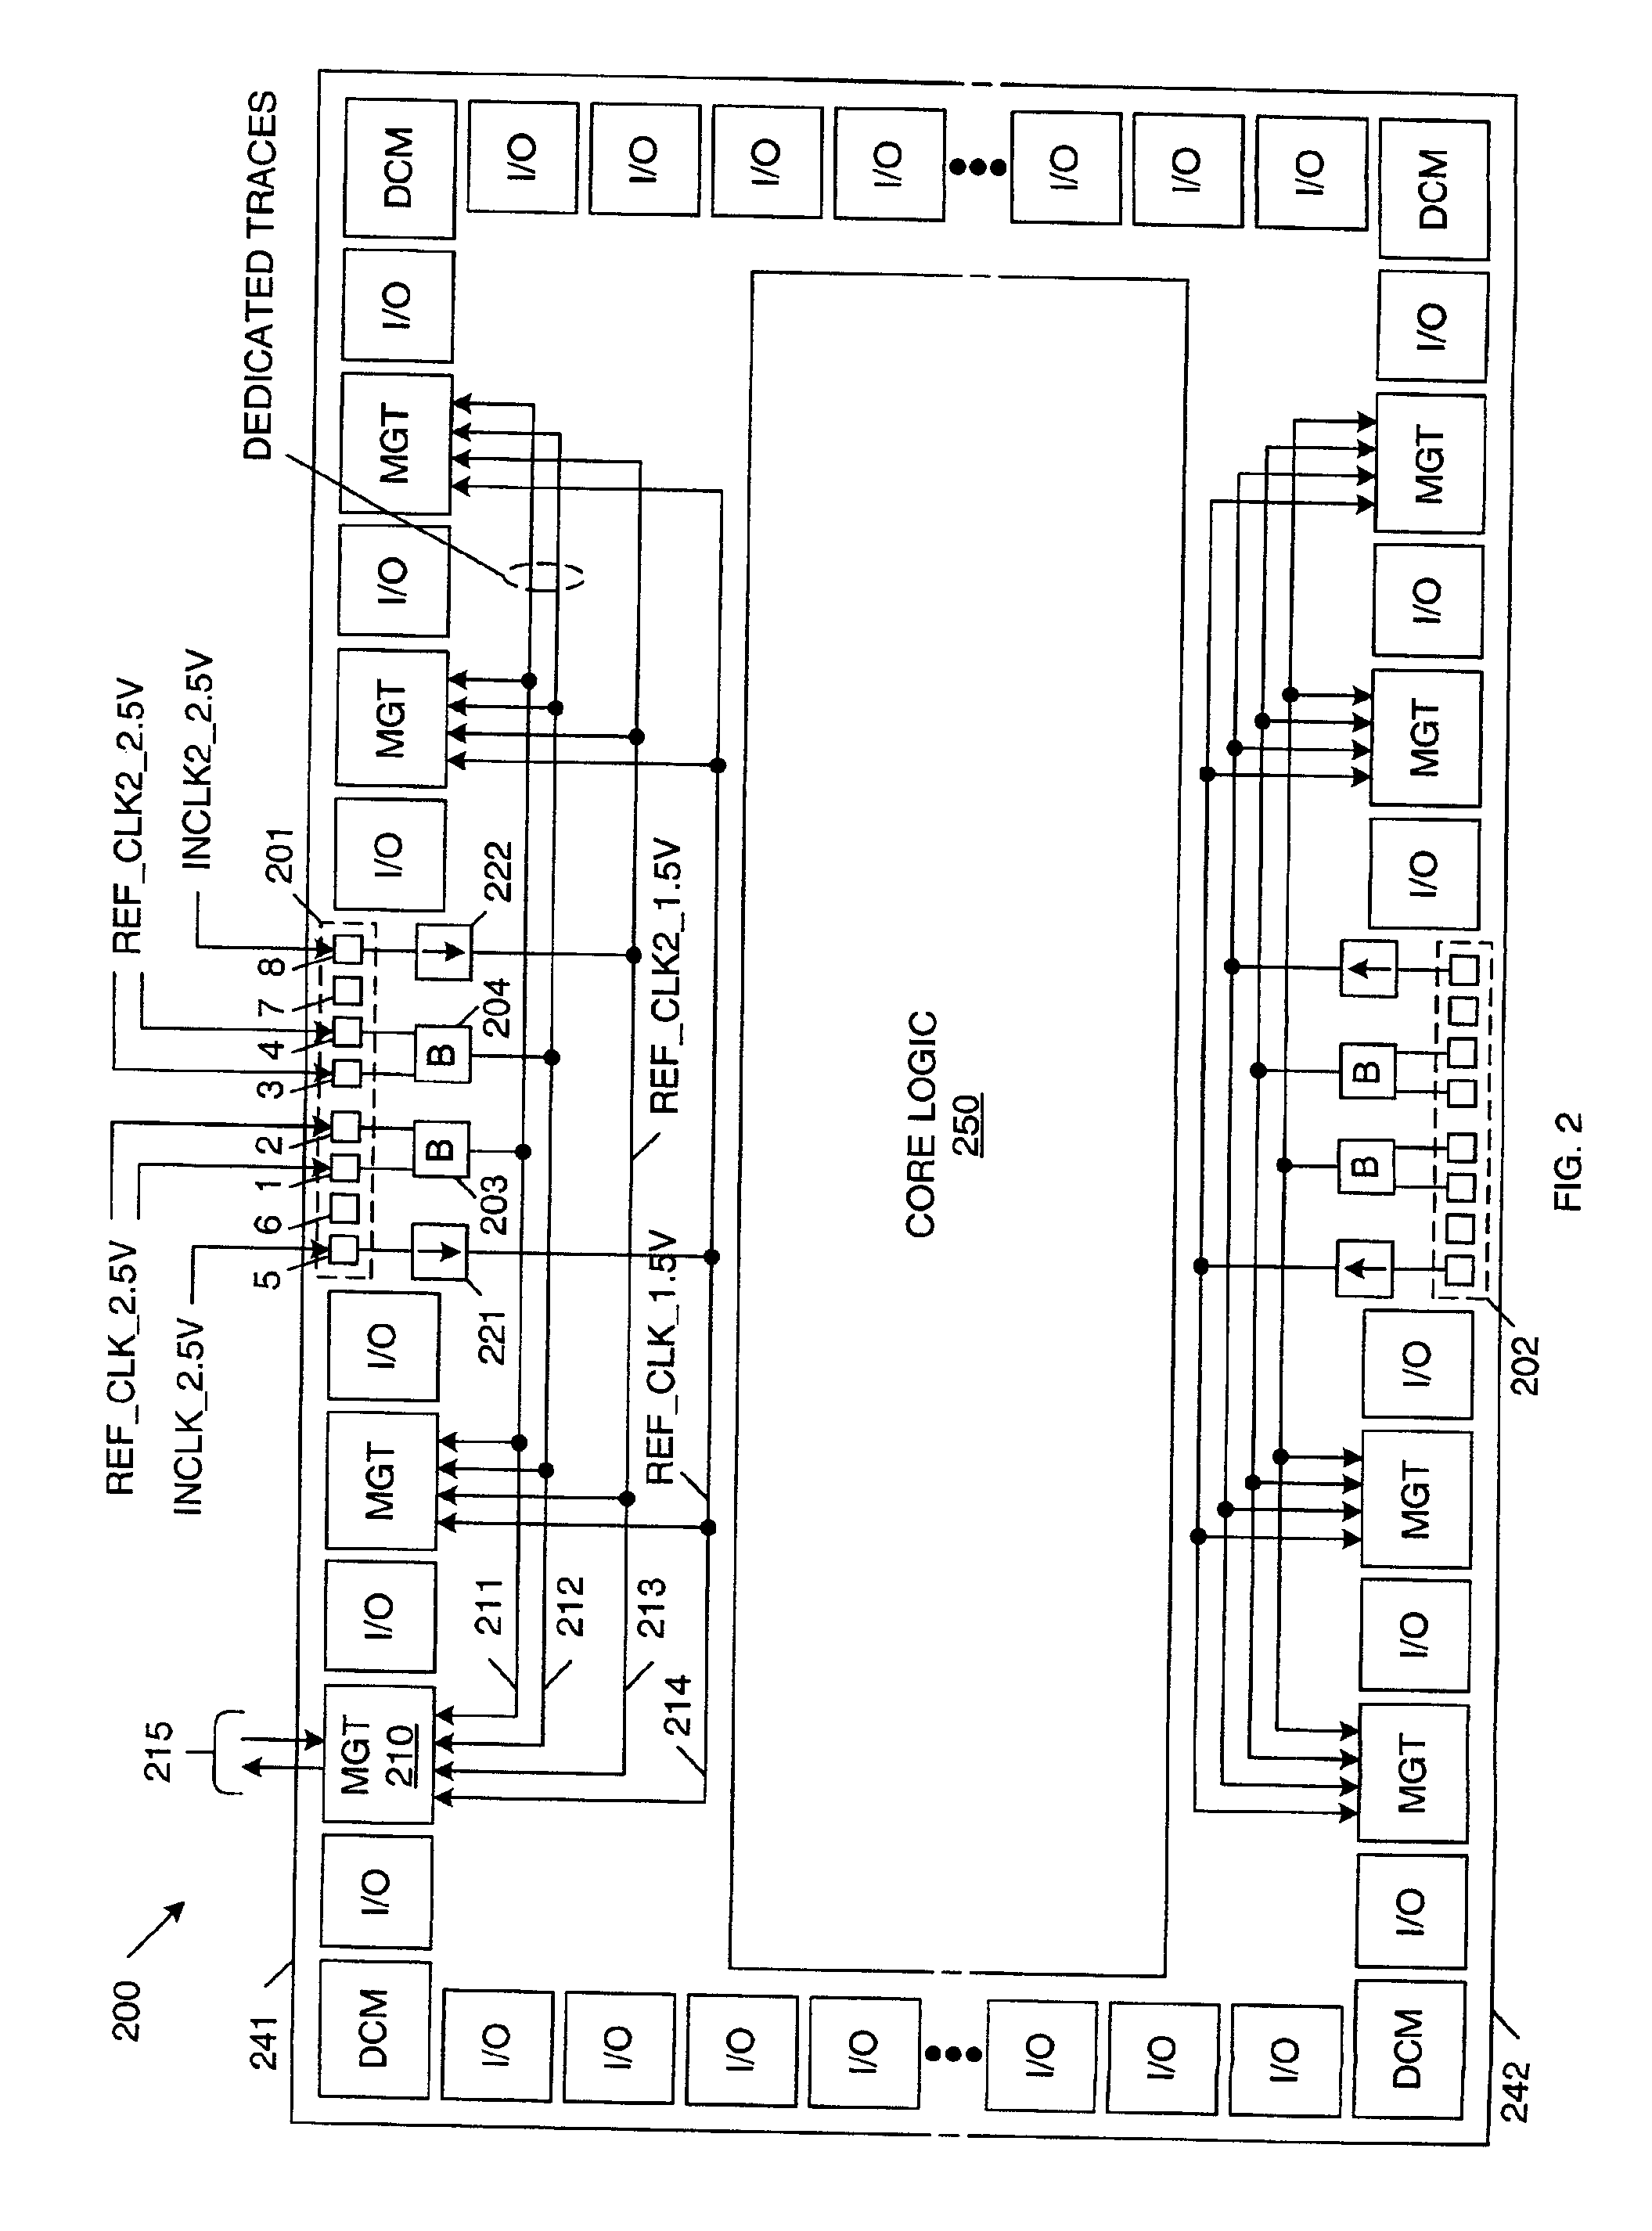 Low jitter clock for a physical media access sublayer on a field programmable gate array